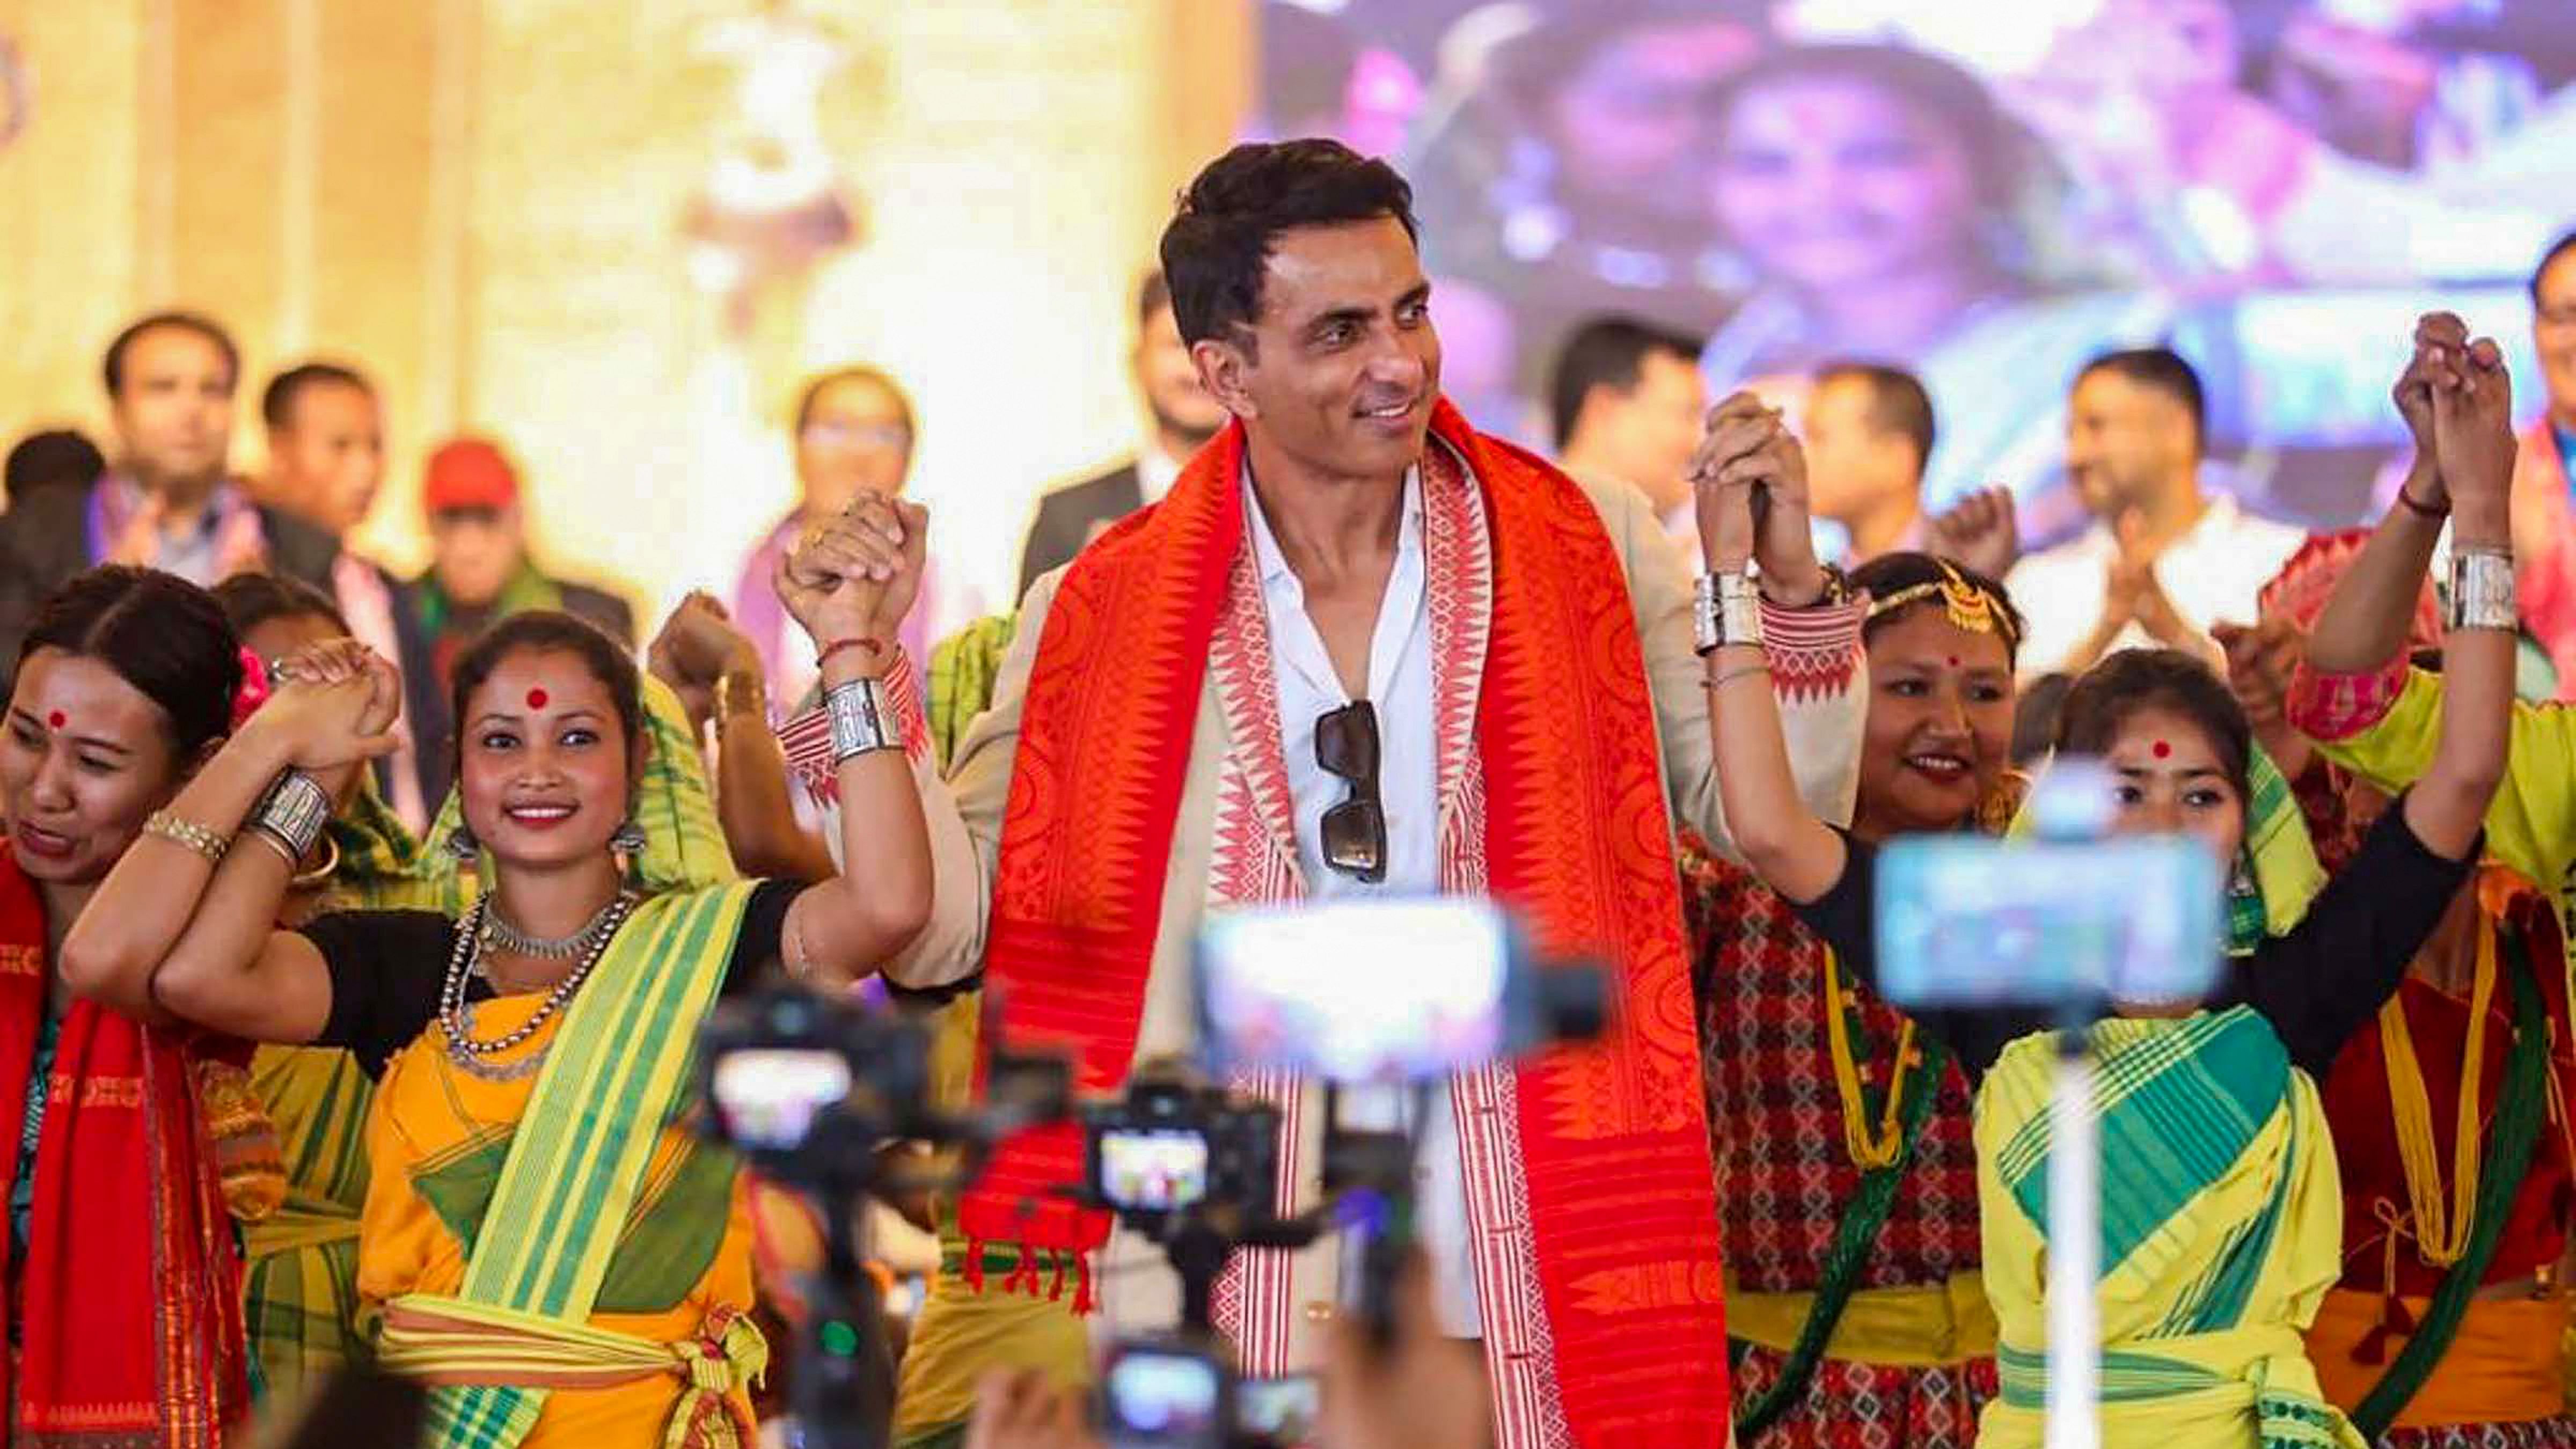 actor Sonu Sood attends the 1st Bodoland International Knowledge Festival. Credit: PTI Photo